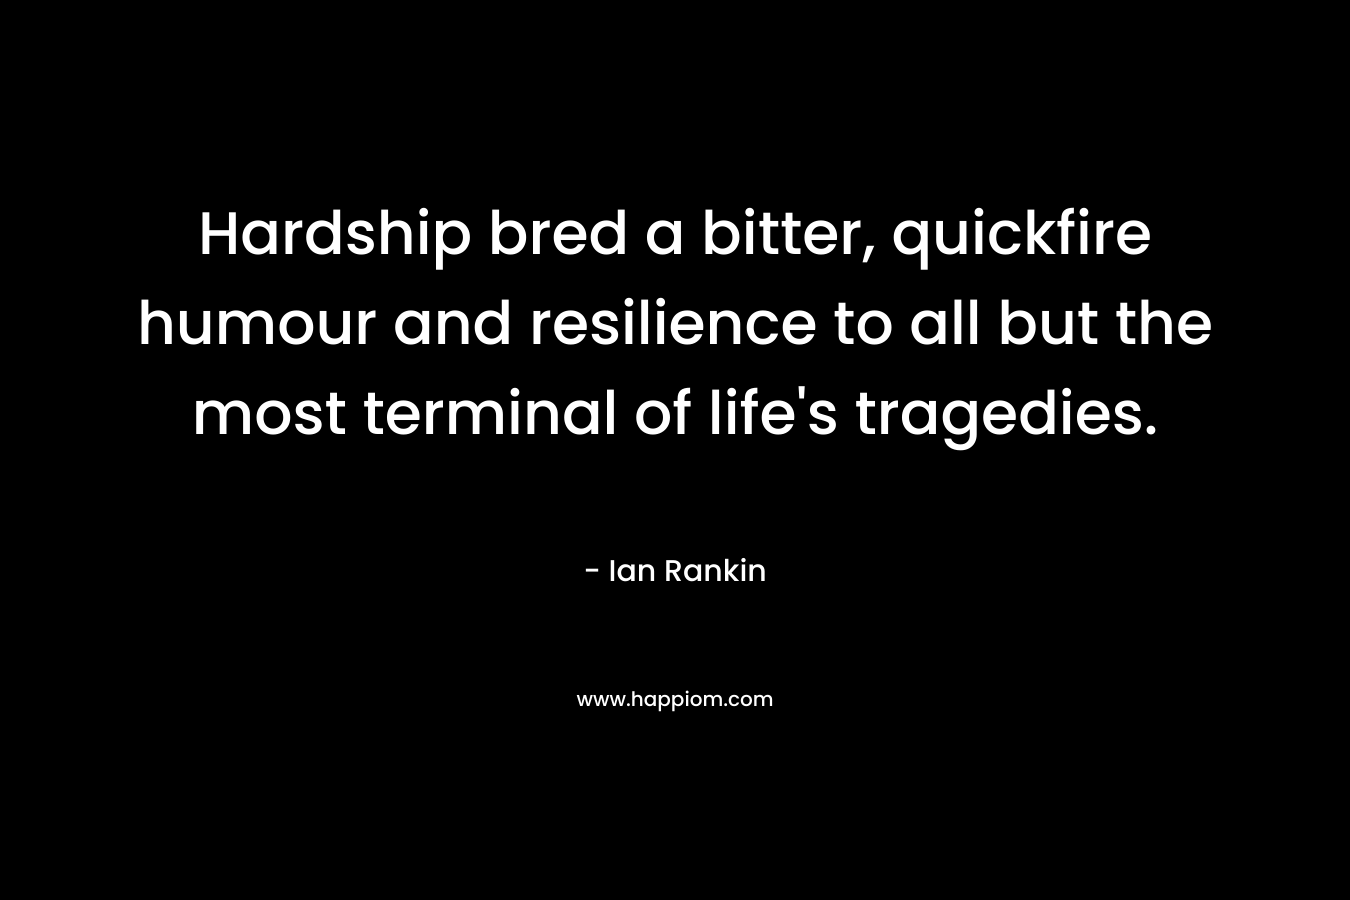 Hardship bred a bitter, quickfire humour and resilience to all but the most terminal of life’s tragedies. – Ian Rankin